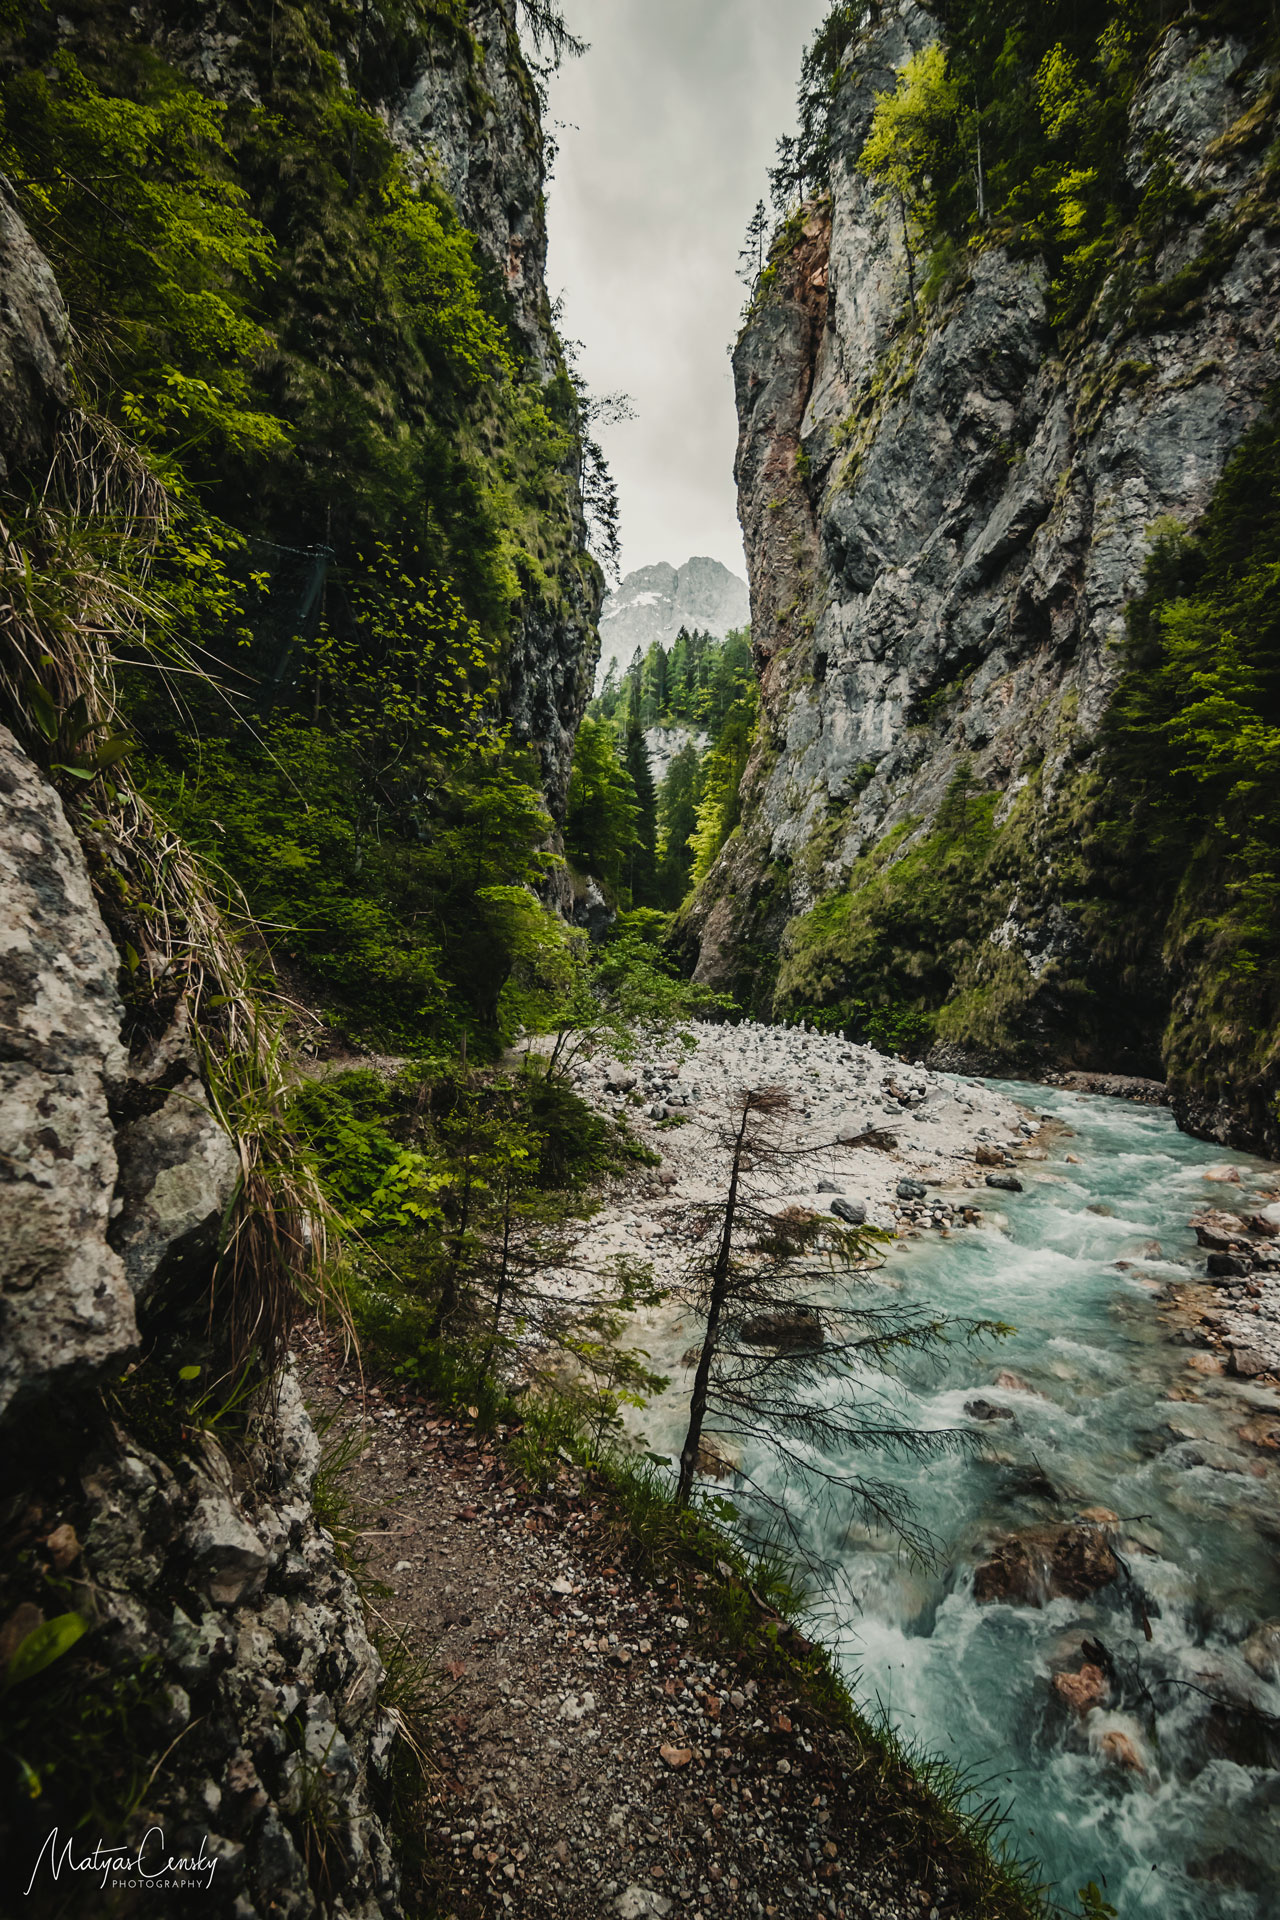 Photo of a wild river canoyn leading up to the mountains in Triglav National Park, Slovenia.